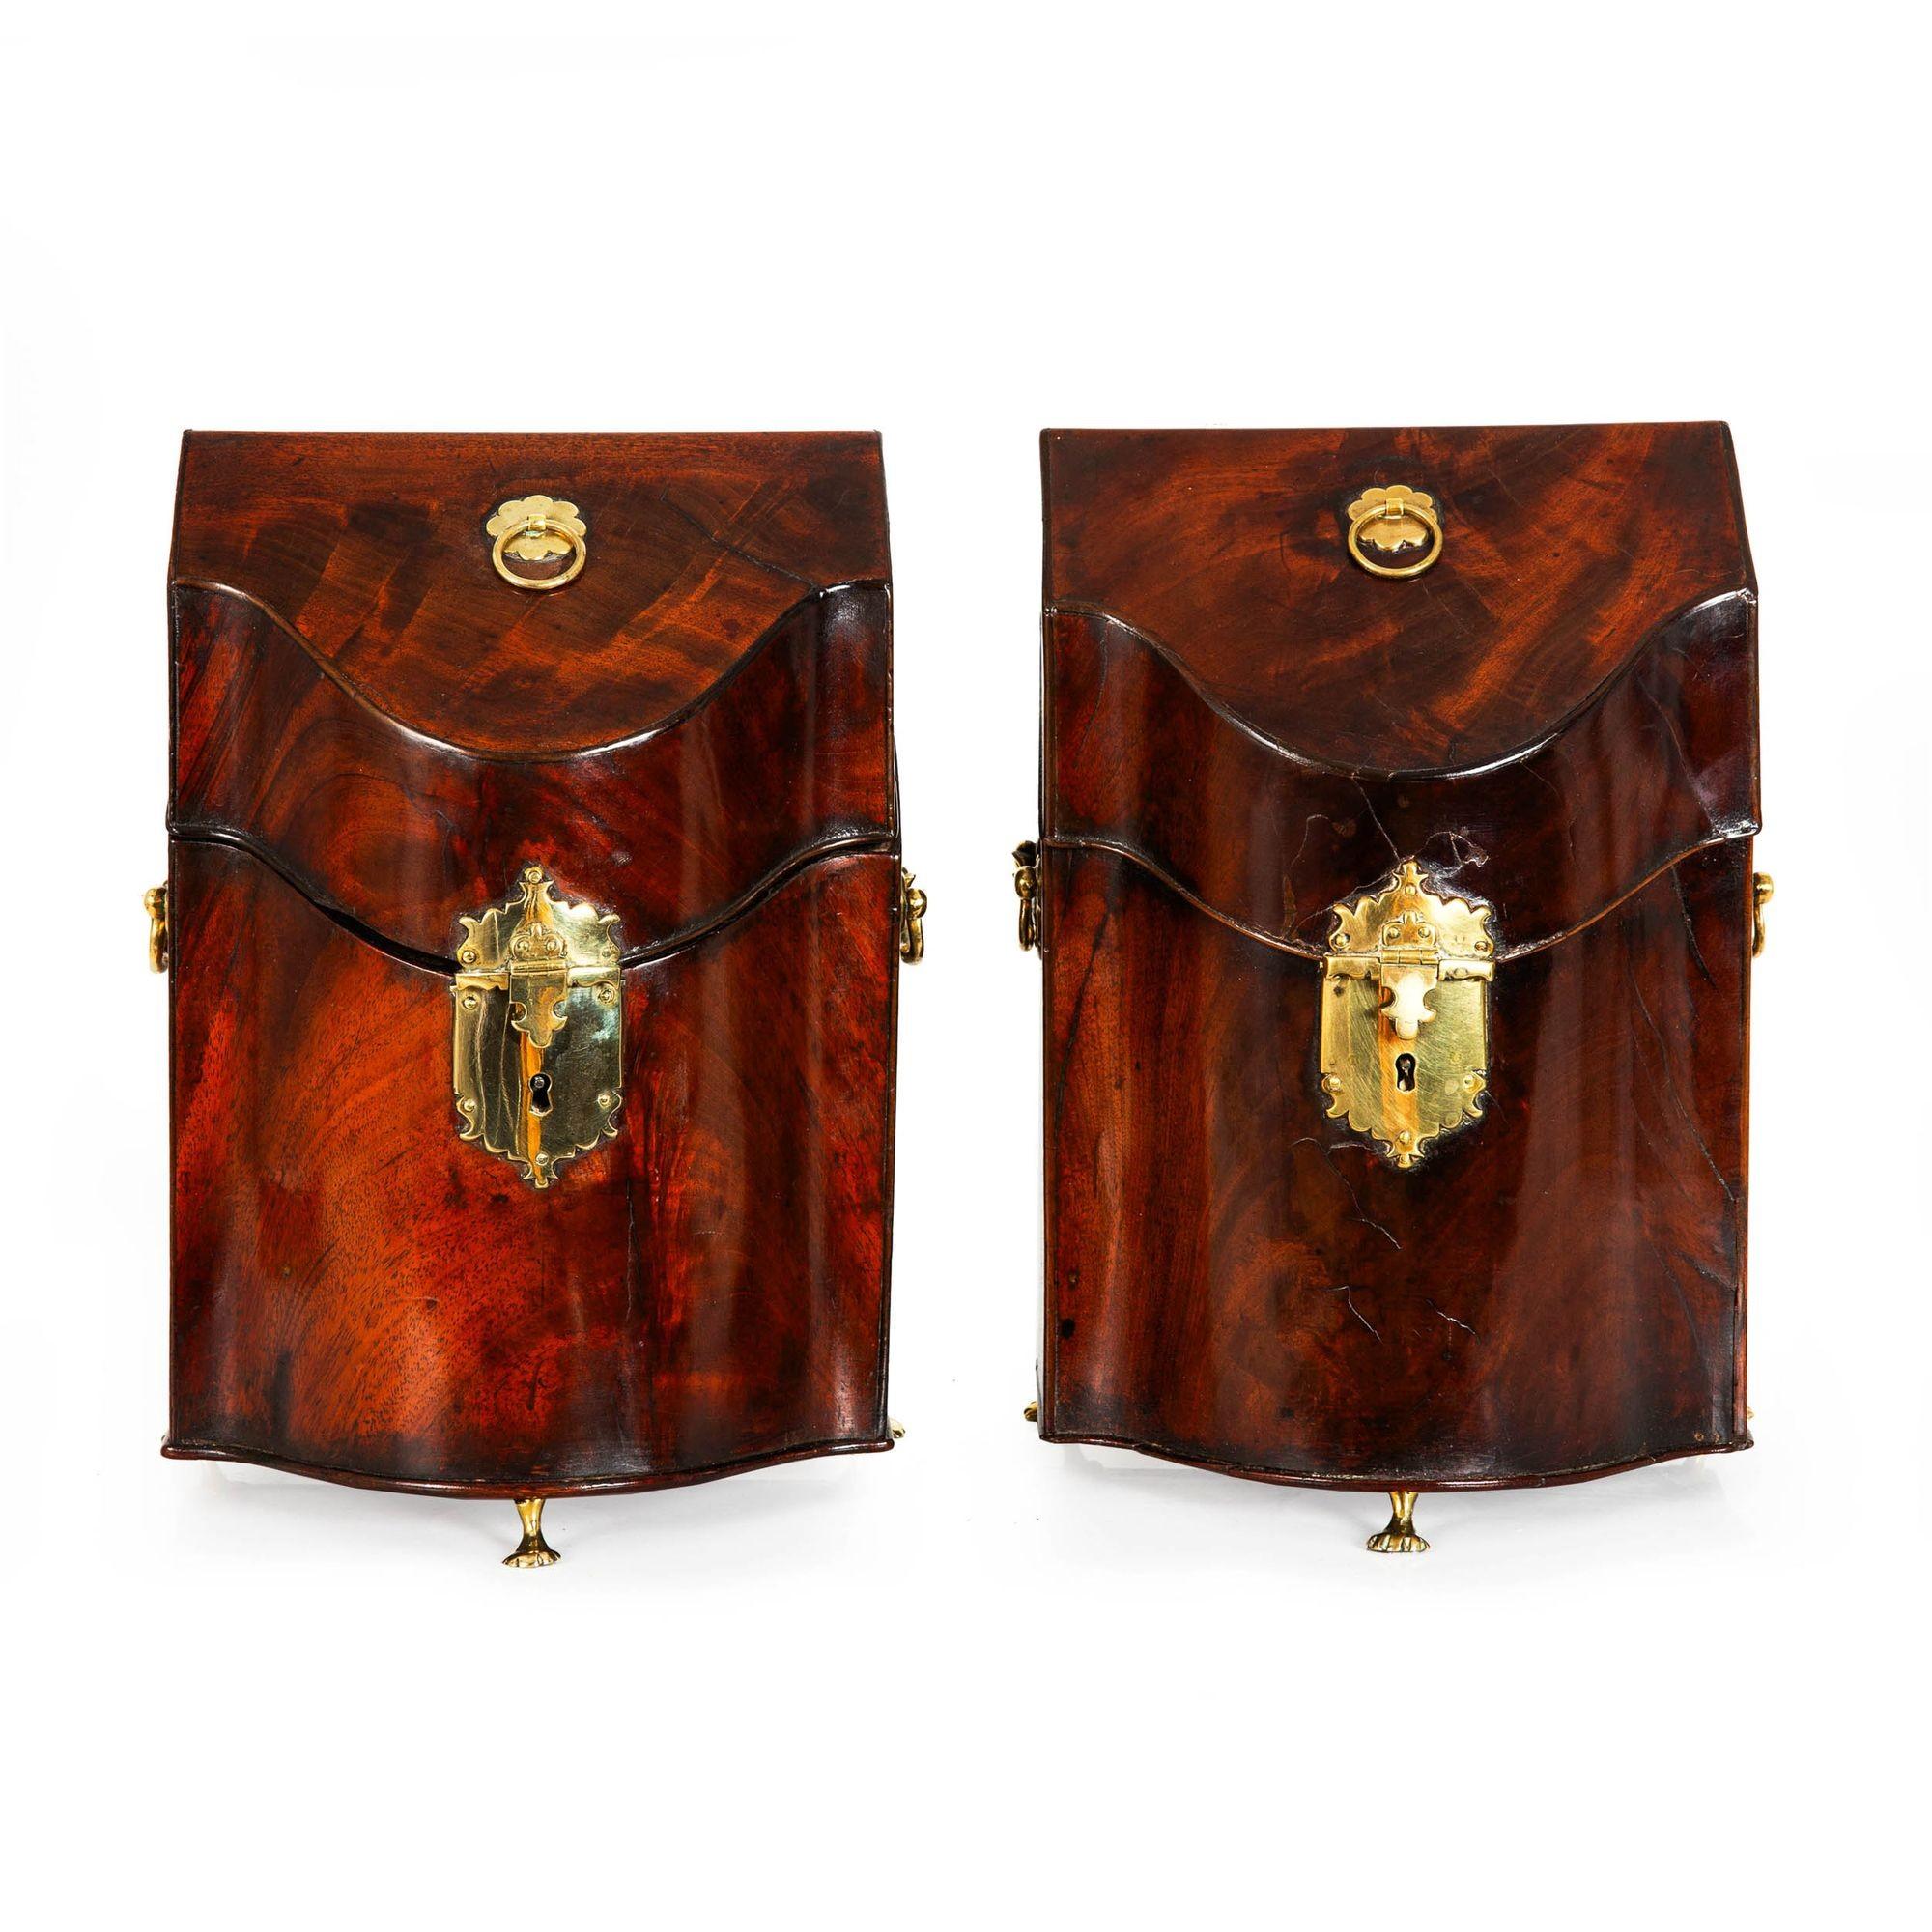 GEORGE III FLAMED MAHOGANY SERPENTINE BOXES ON ANIMAL FEET
England, circa 1780  the cutlery divider removed, otherwise fine original condition
Item # 403ONQ02L

An absolutely gorgeous pair of George III peiod boxes, they present with a serpentine